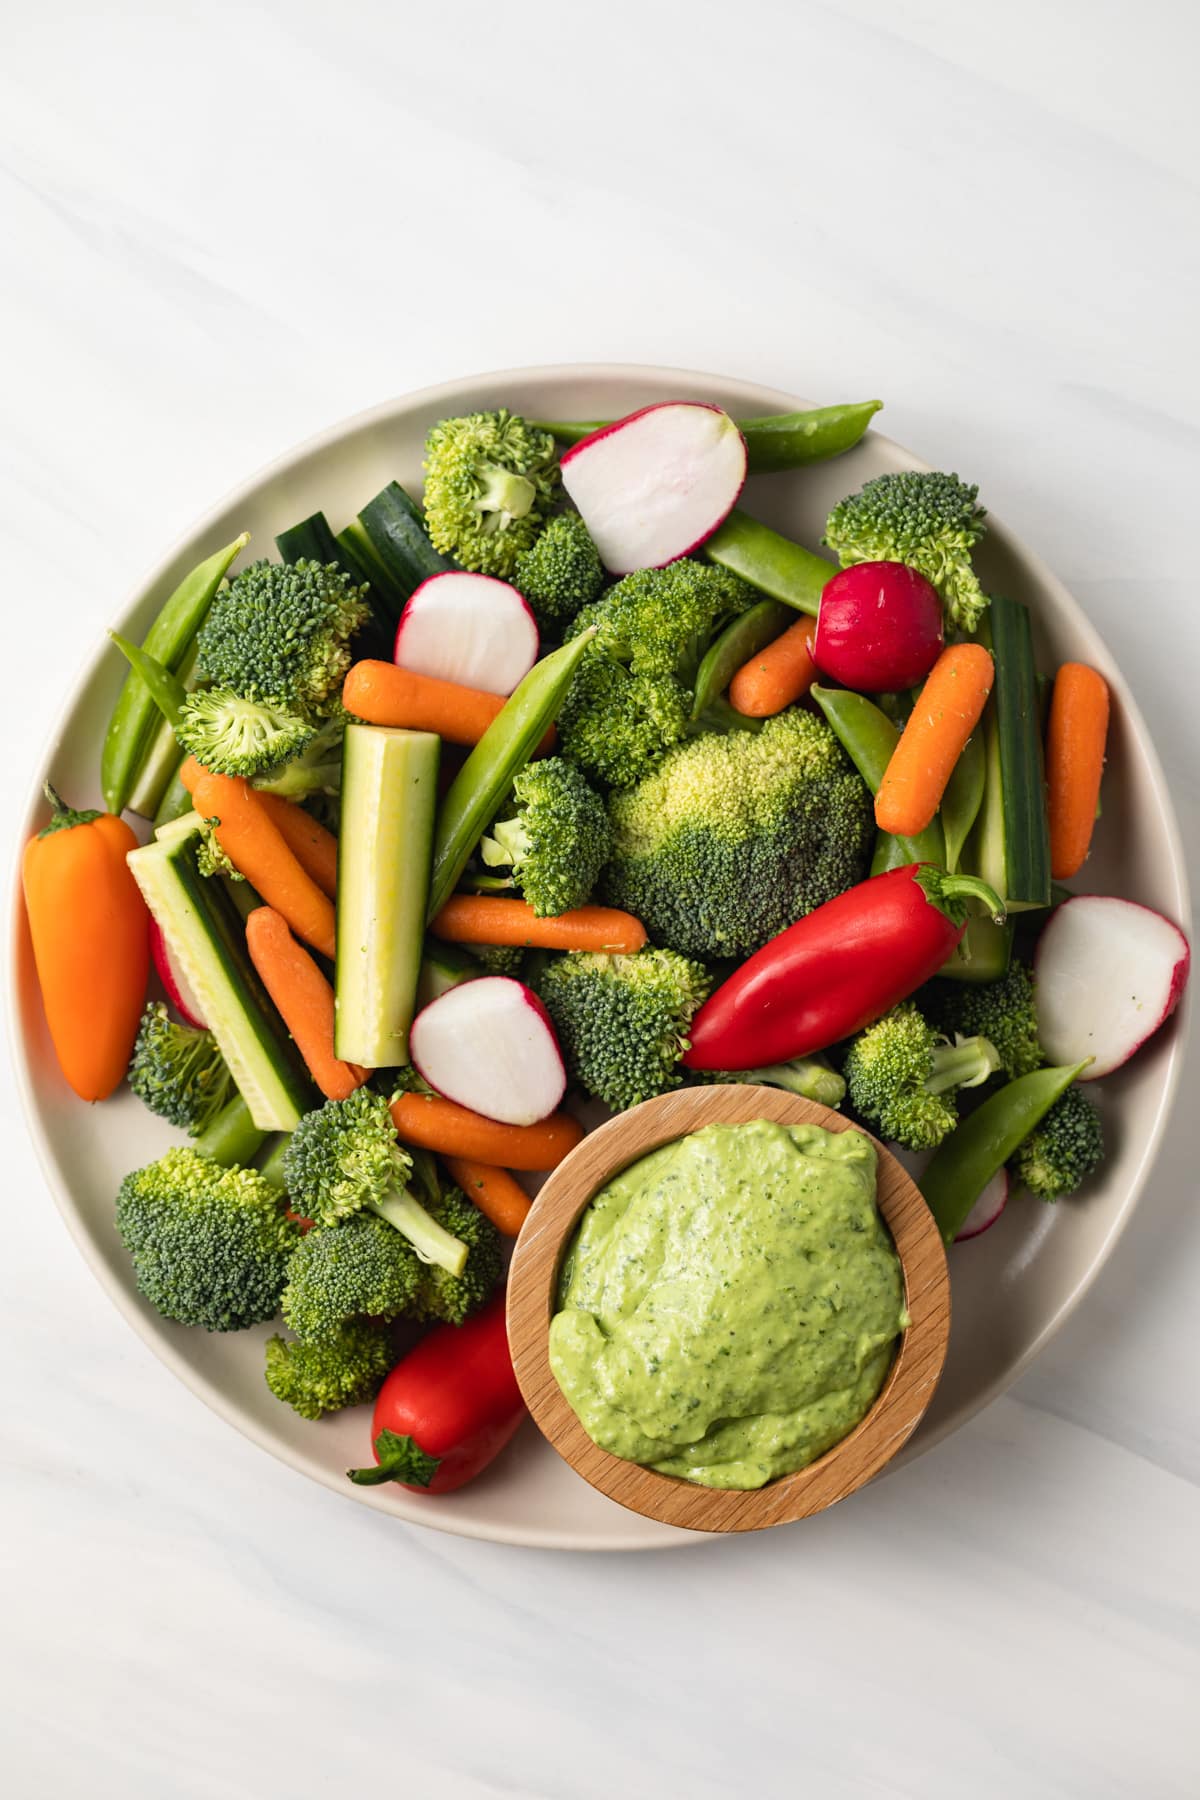 Green goddess pesto sauce in a bowl with fresh veggies on the side.